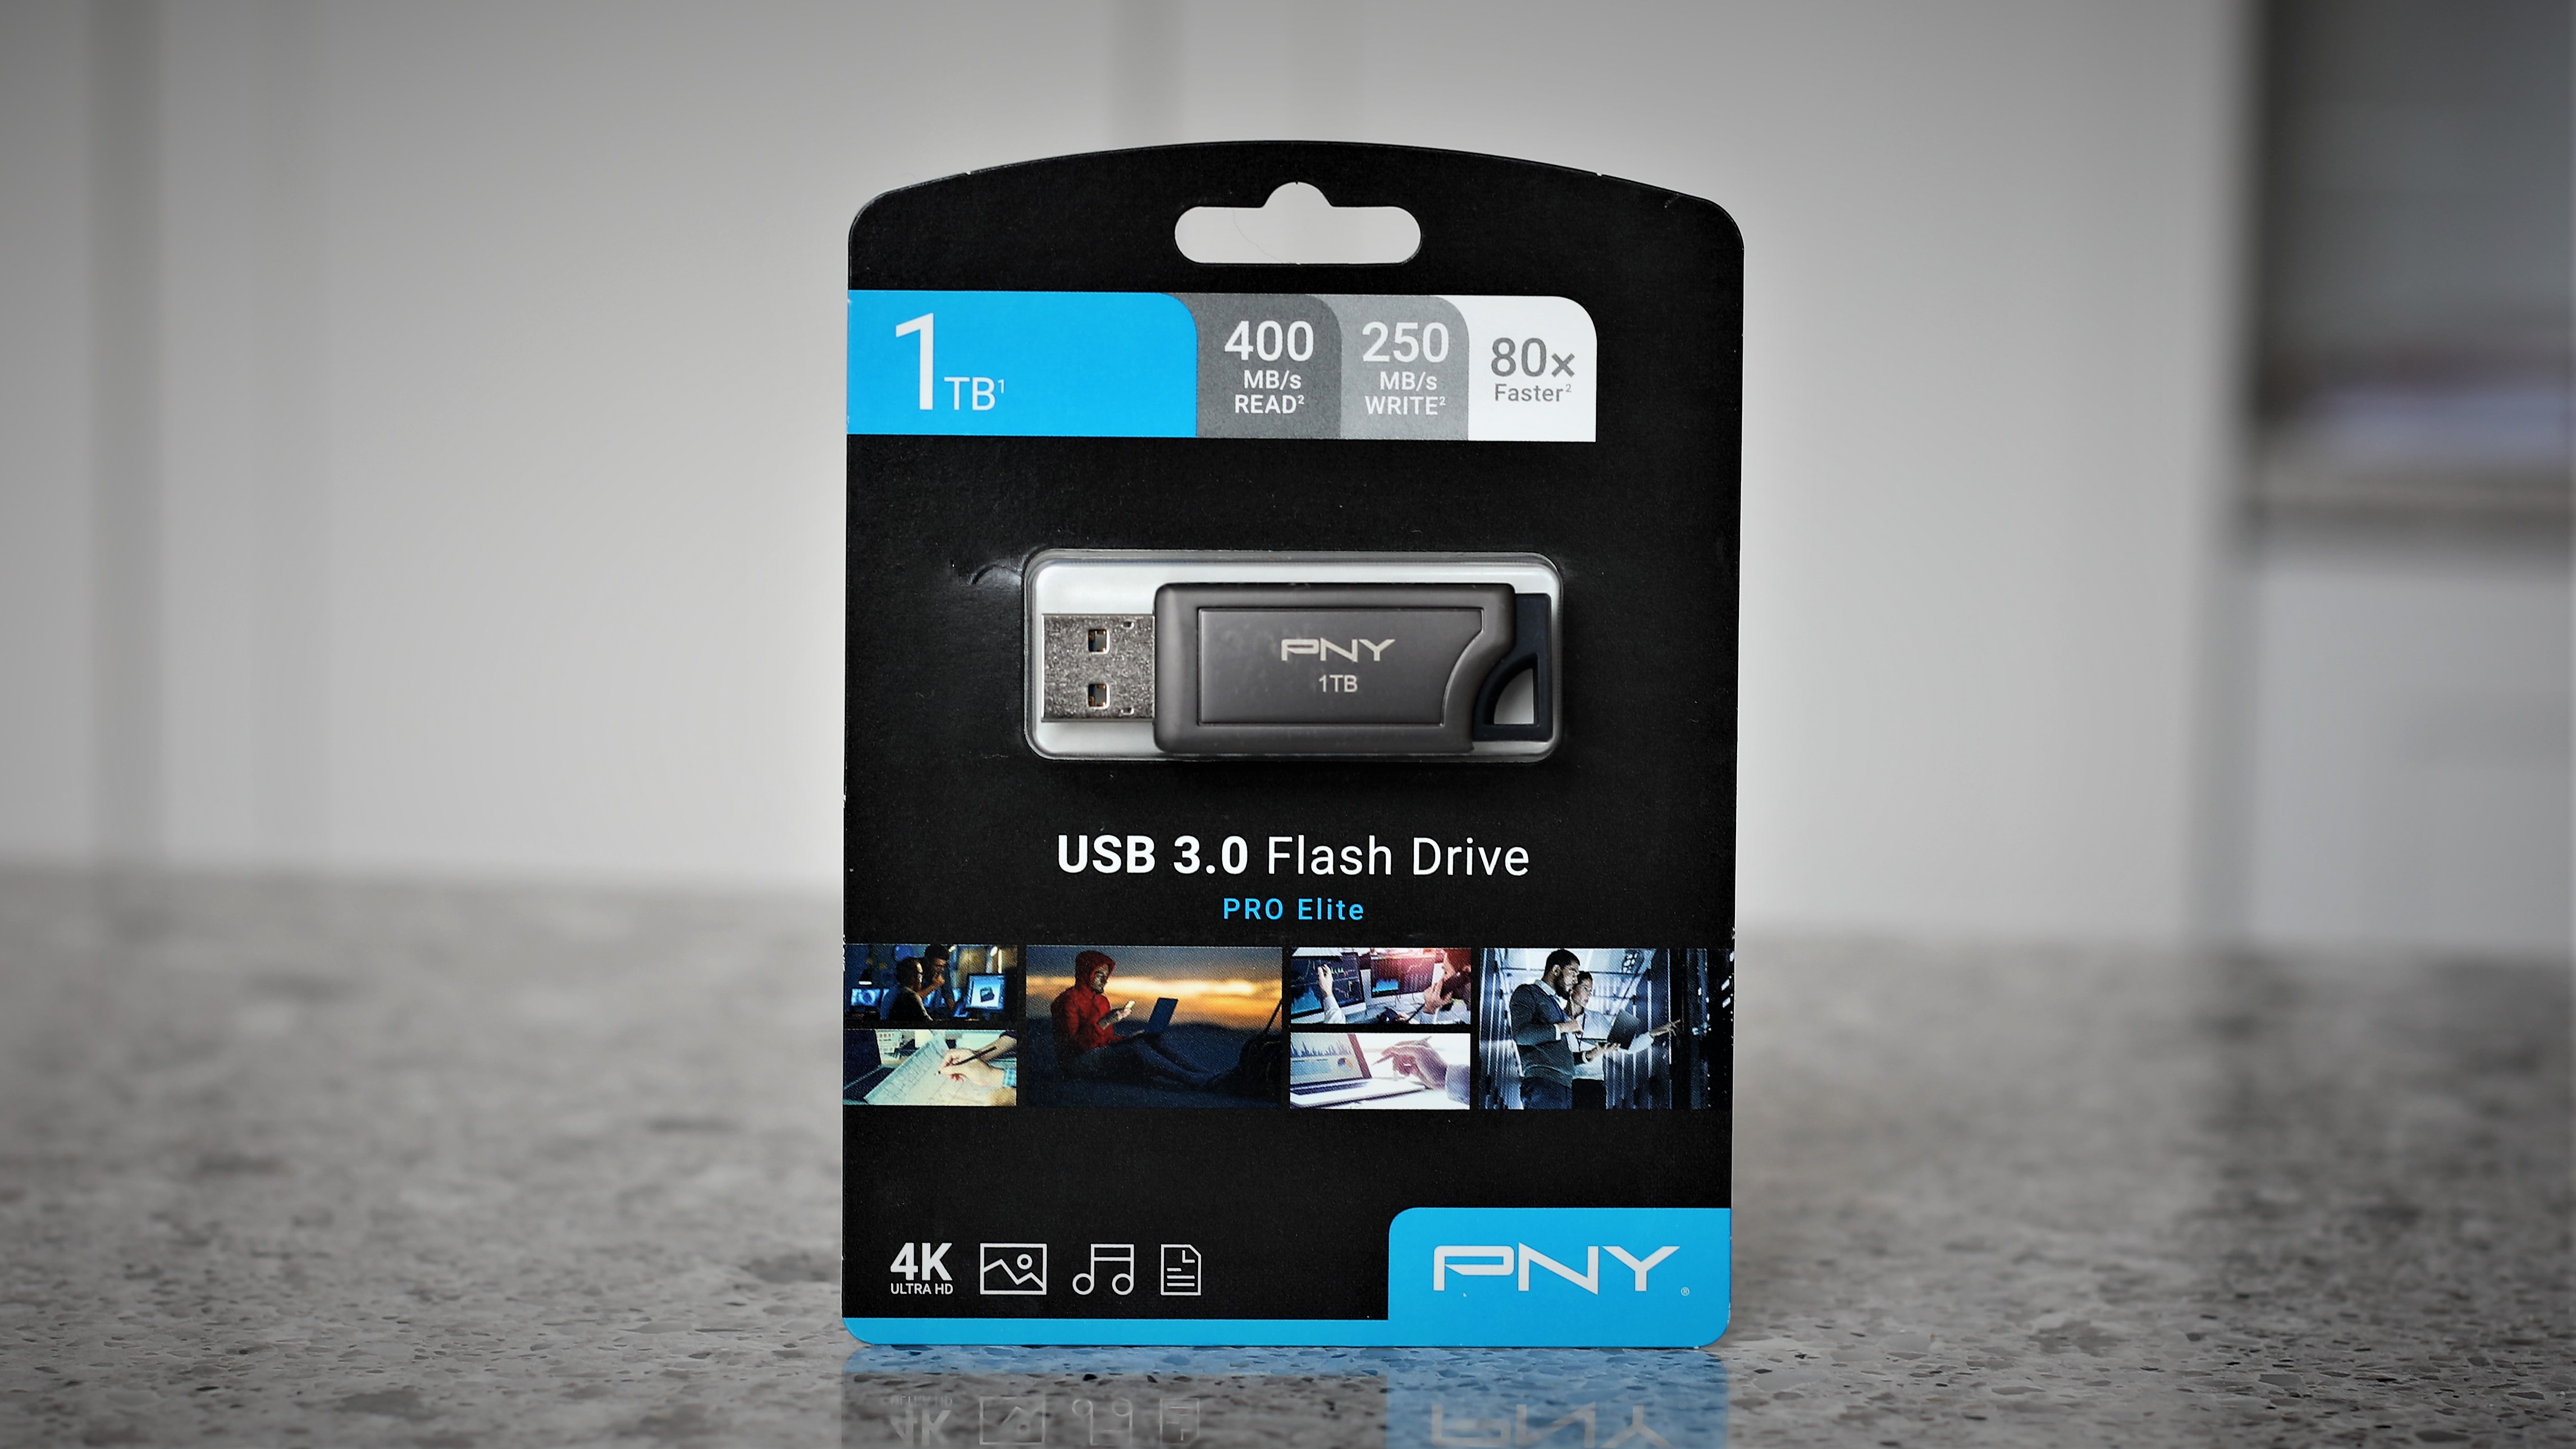 Underinddel scramble frekvens PNY 1TB Pro Elite and Elite X USB 3.0/1 Flash Drive Review - High Capacity  and Speed in a Very Small Footprint | The SSD Review